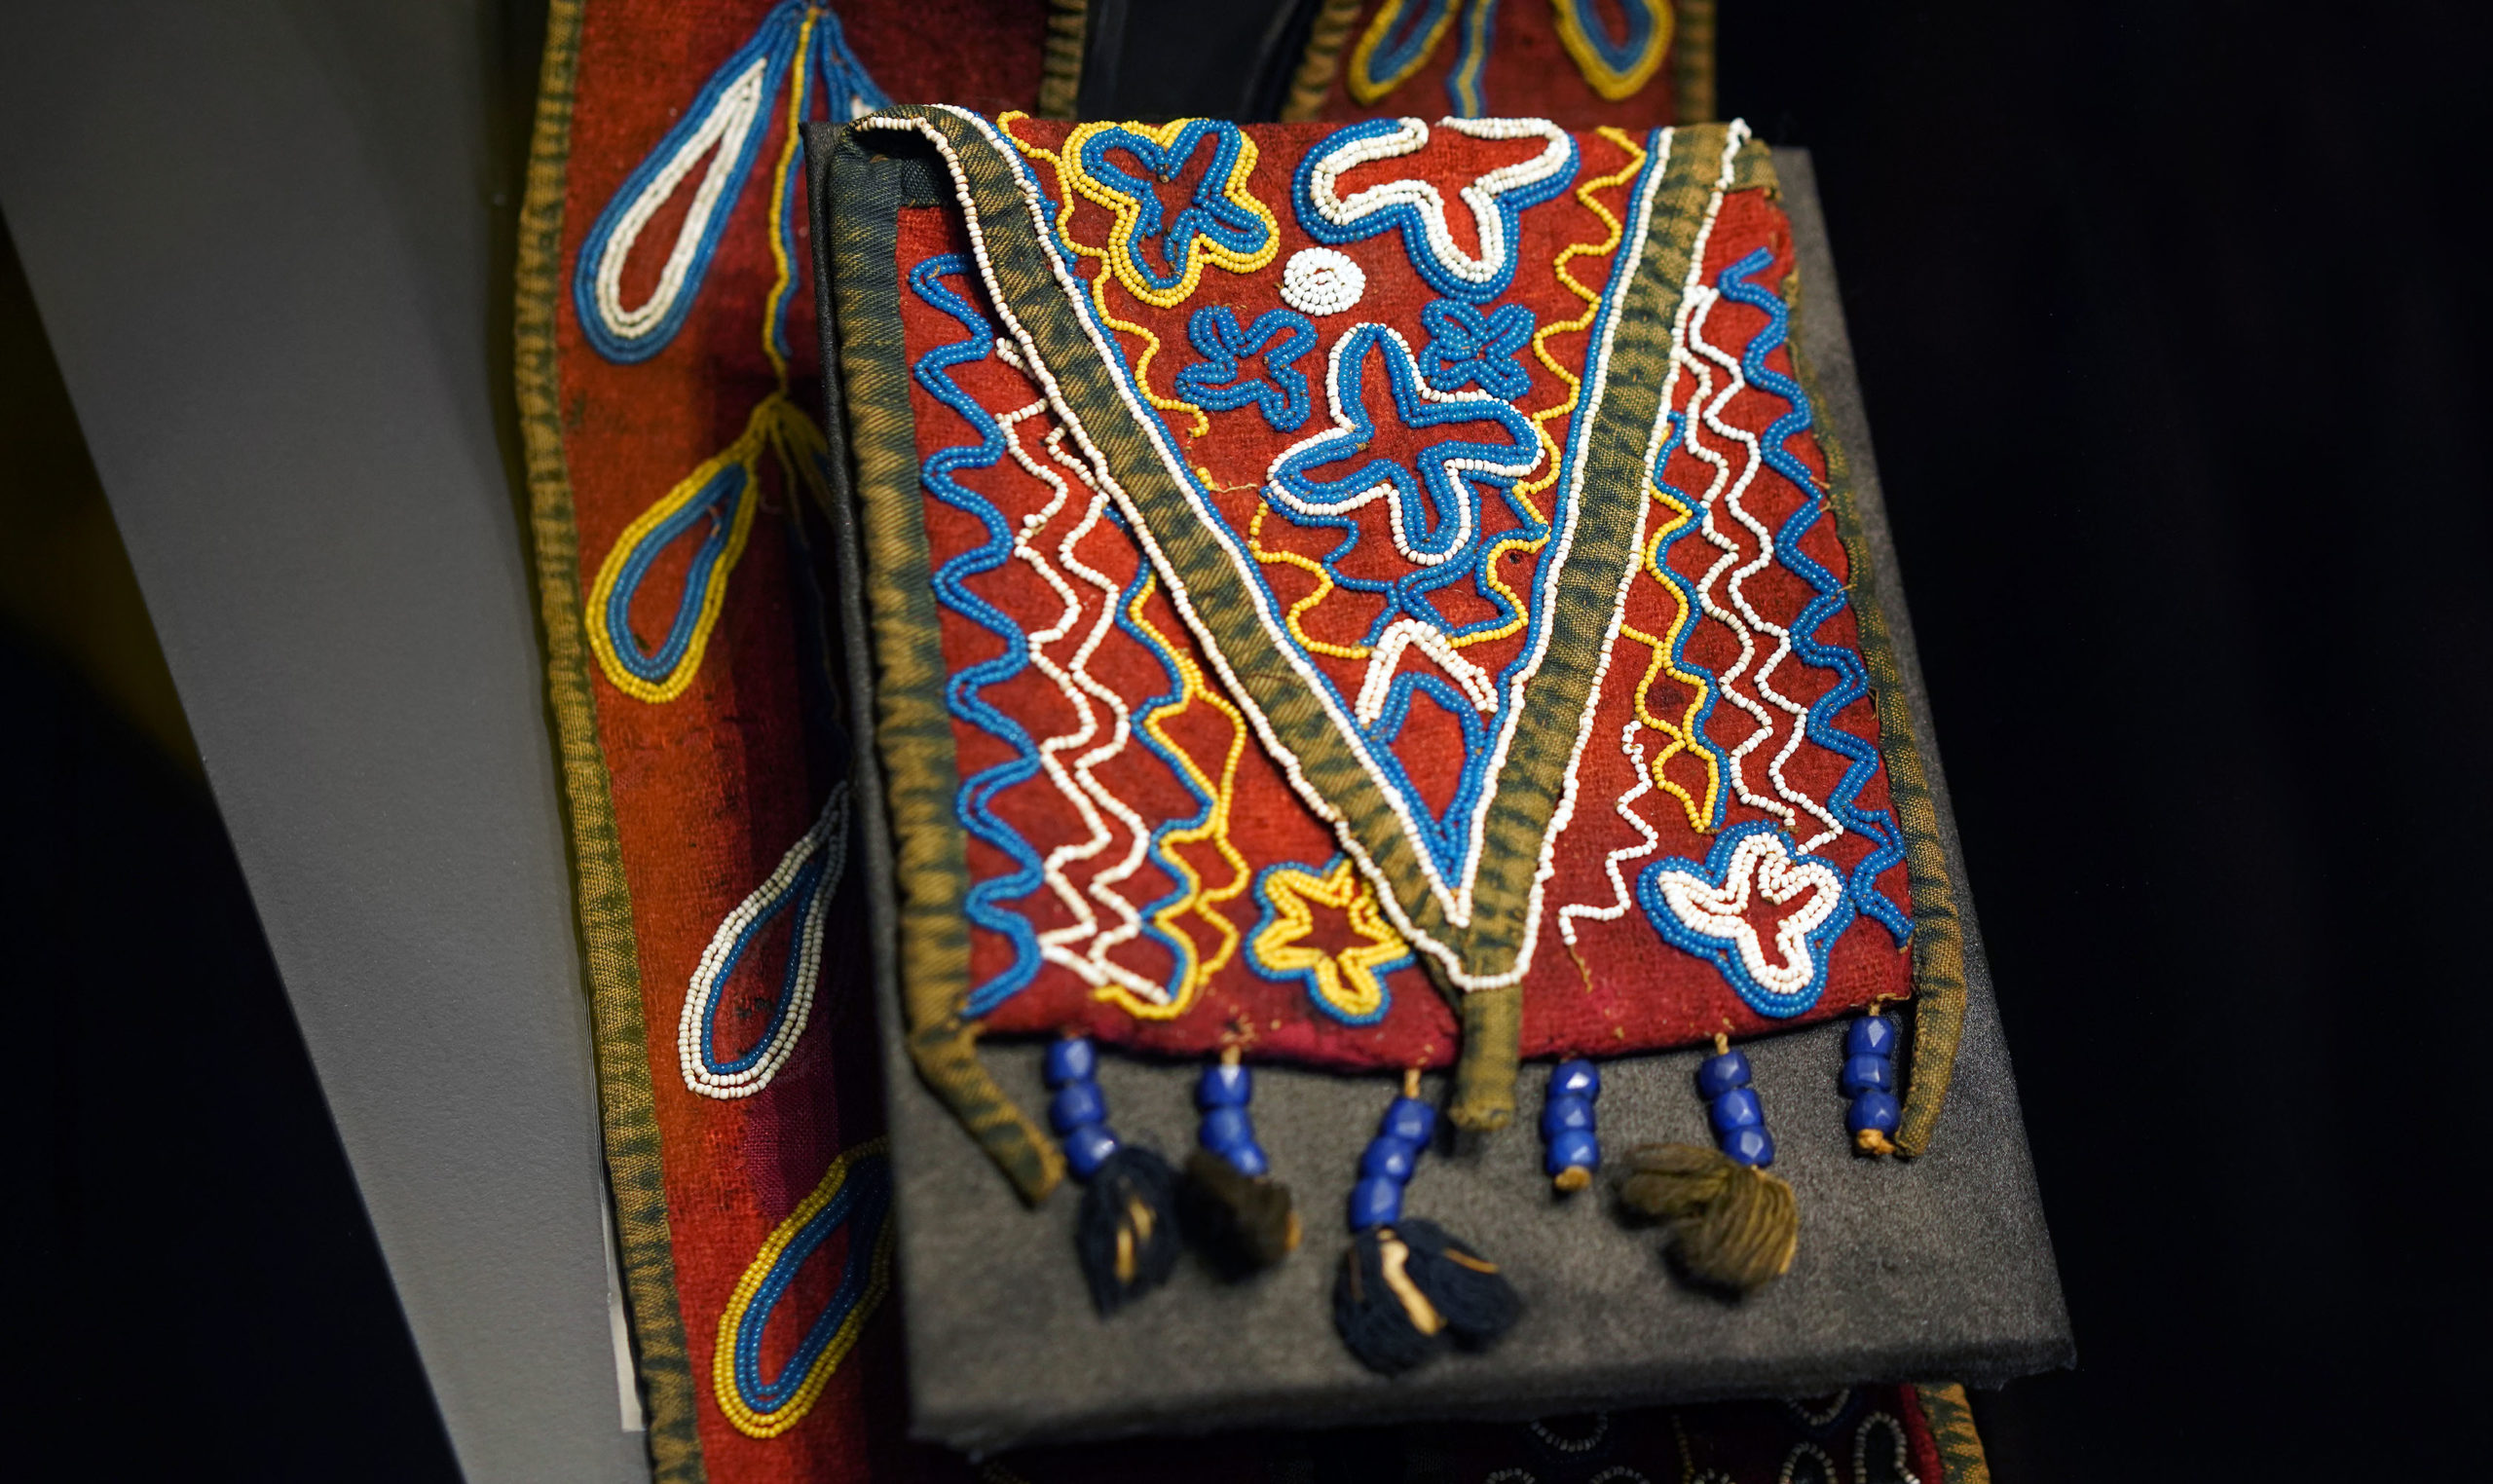 Bandolier bag, likely Delaware, wool, glass beads, cotton, fringe c. 1860 (The American Civil War Museum, photo: Steven Zucker, CC BY-NC-SA 2.0)